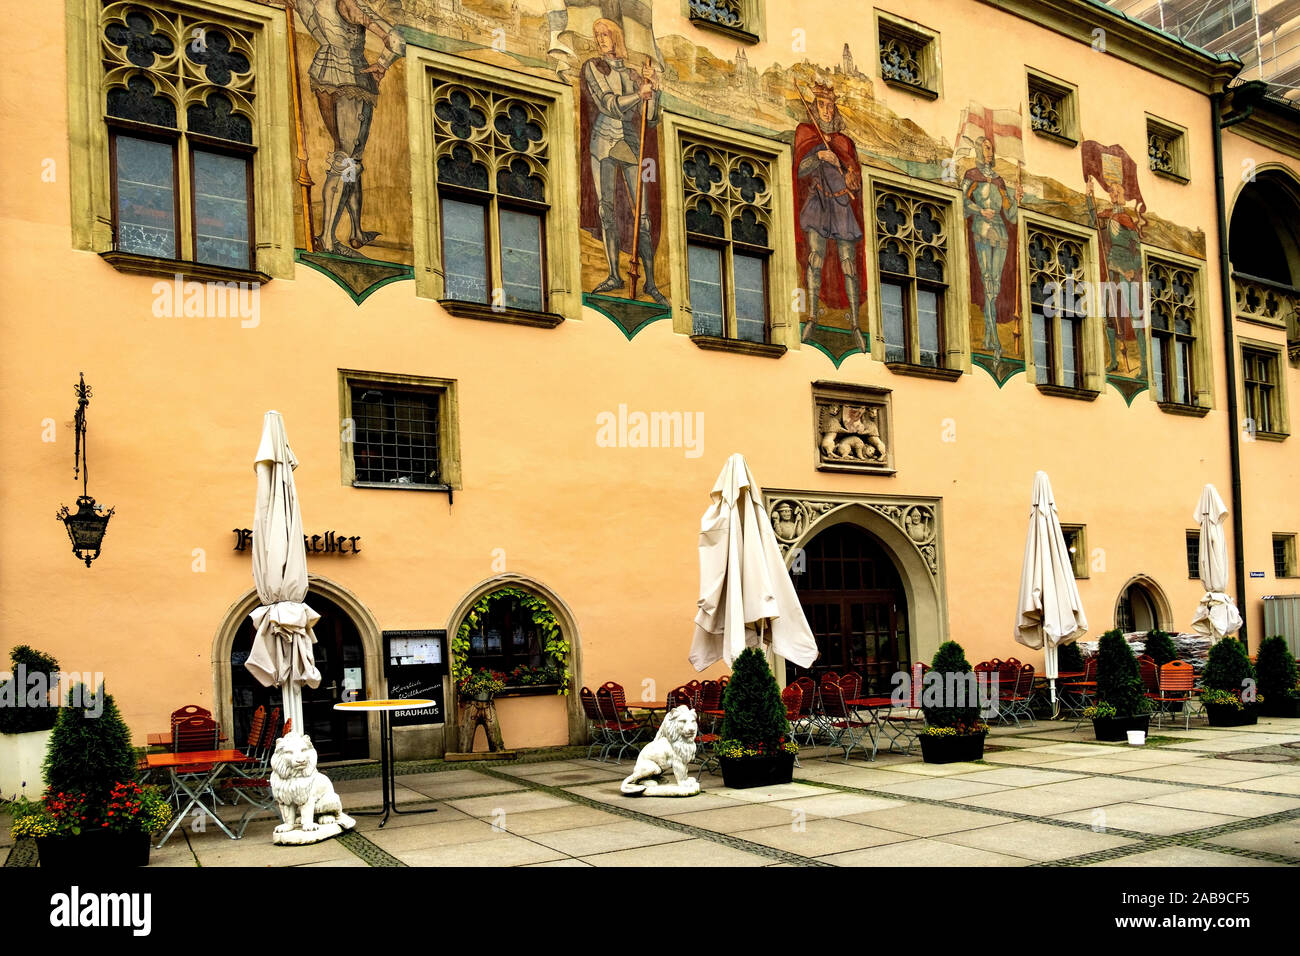 The town hall with handing heraldic banners in the city of Passau, Germany Stock Photo